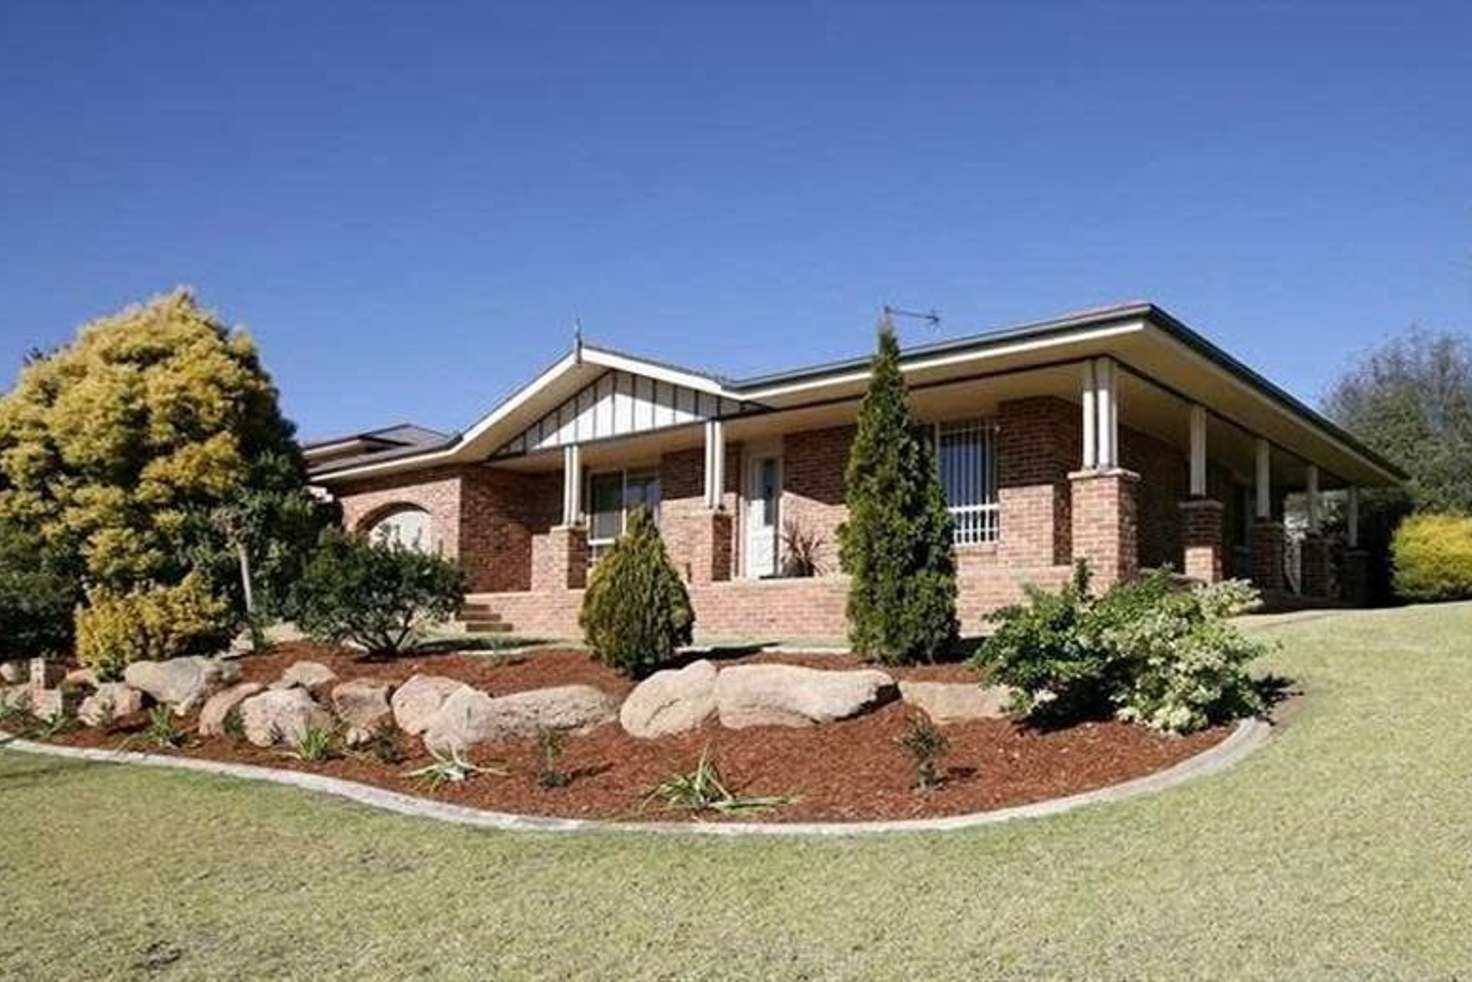 Main view of Homely villa listing, 1/17 Kincora Pl, Bourkelands NSW 2650